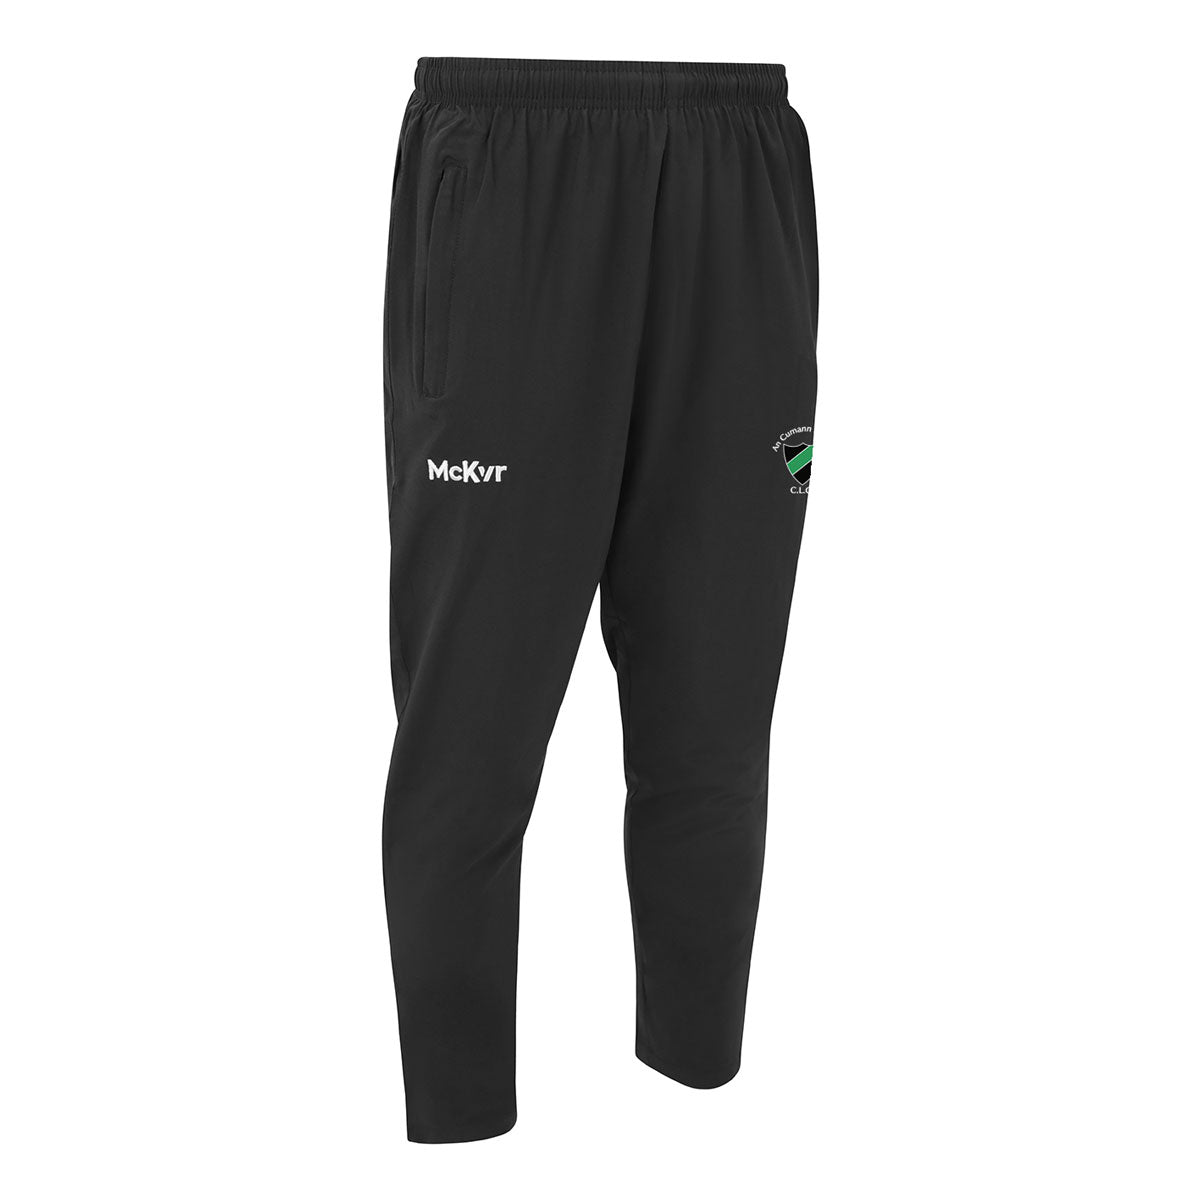 Mc Keever Parnells GAA Core 22 Tapered Pants - Youth - Black